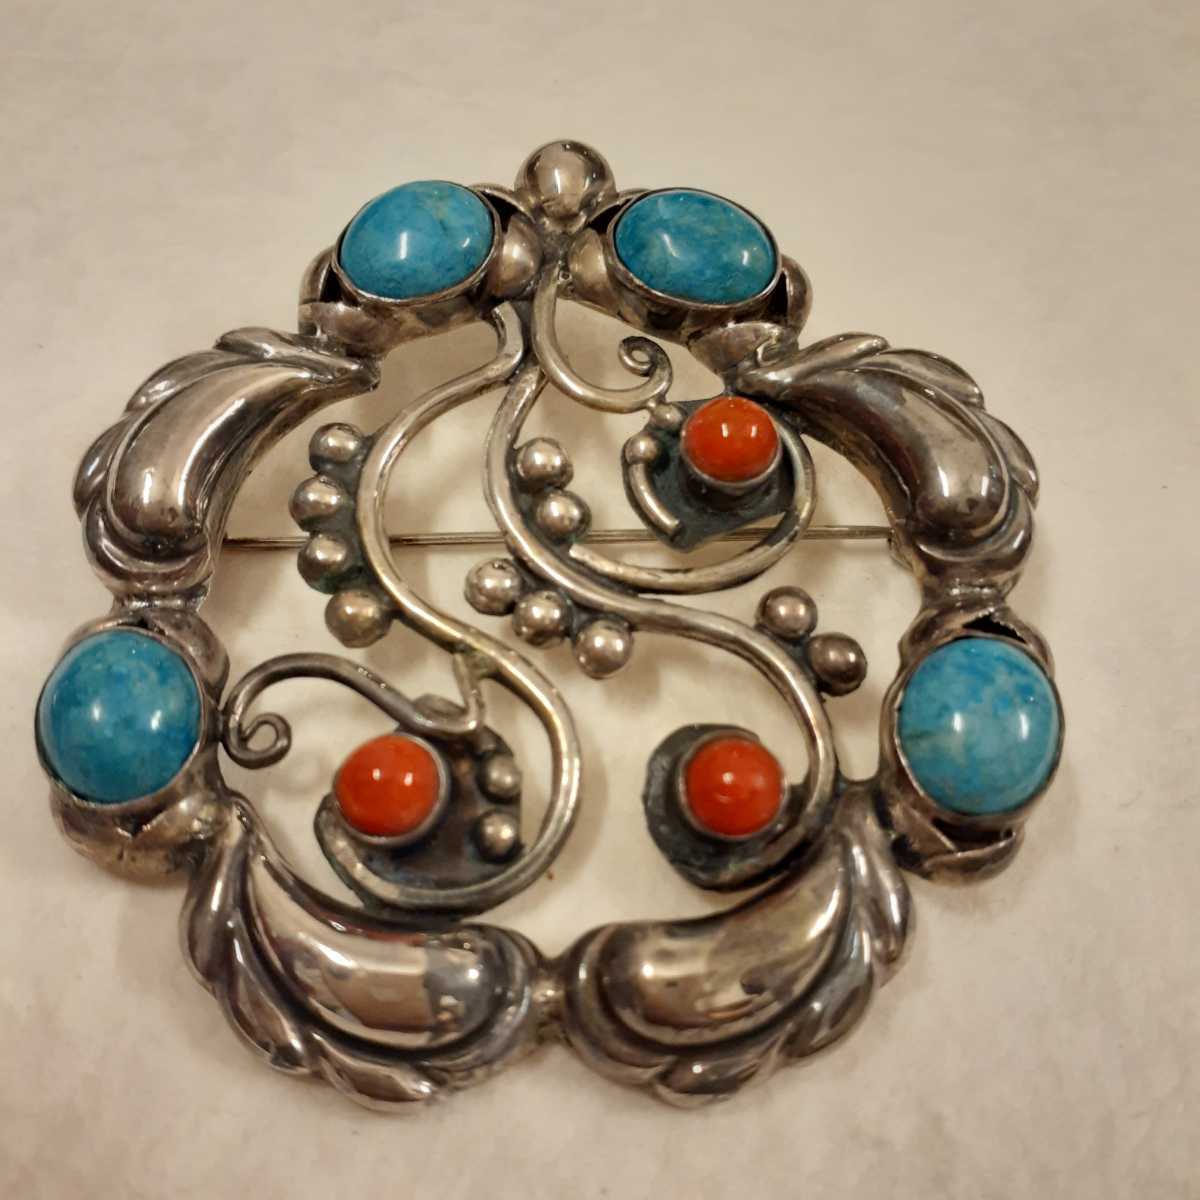  Mexico silver 925 turquoise .. brooch approximately 6cm×5.7cm×0.7cm